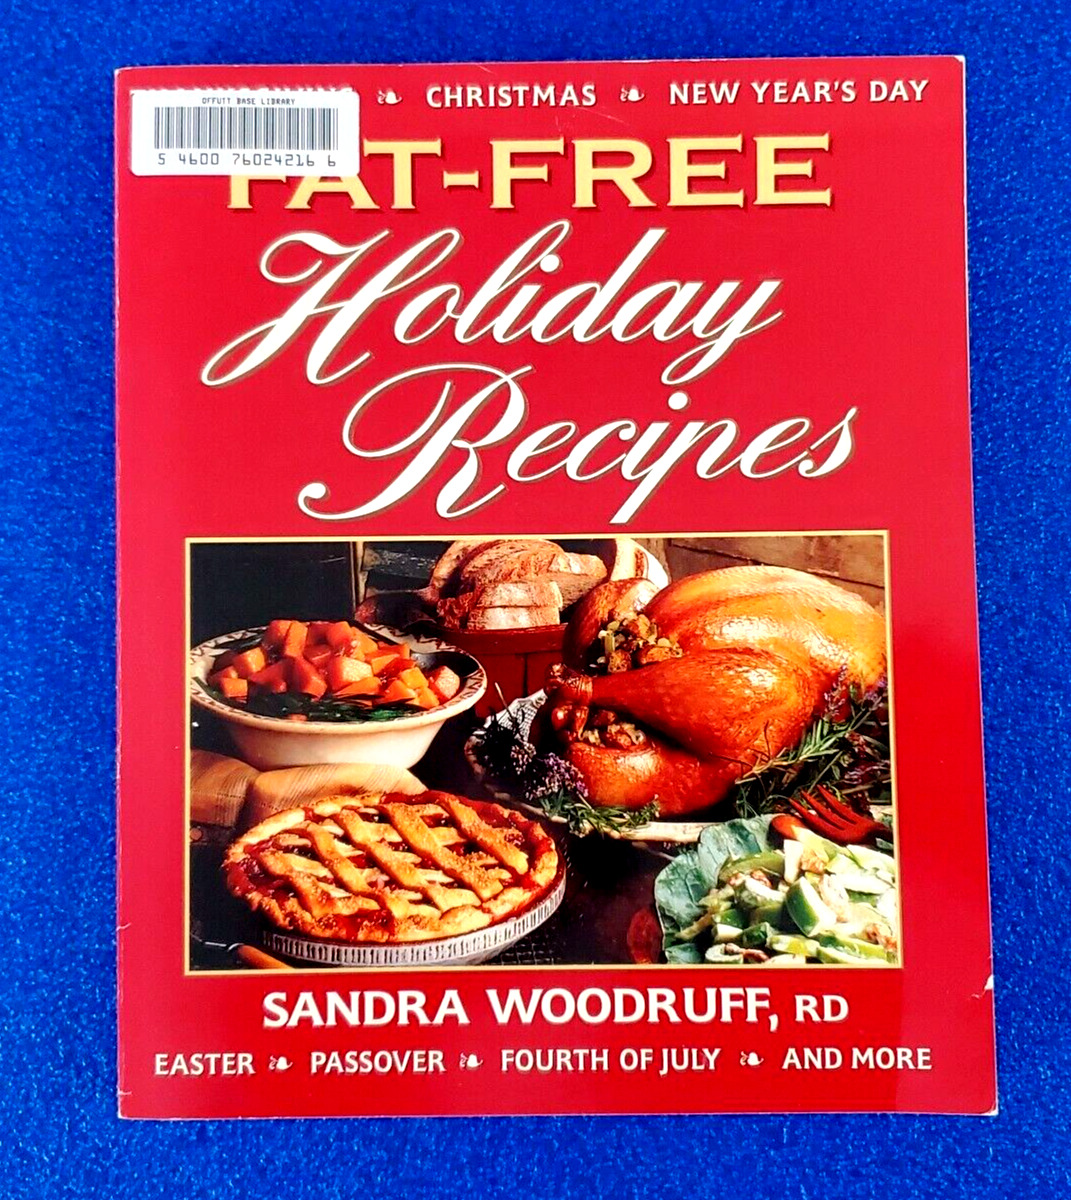 FAT FREE HOLIDAY RECIPES: TRADITIONAL CHRISTMAS COOK BOOK PAPERBACK SHIPS FREE